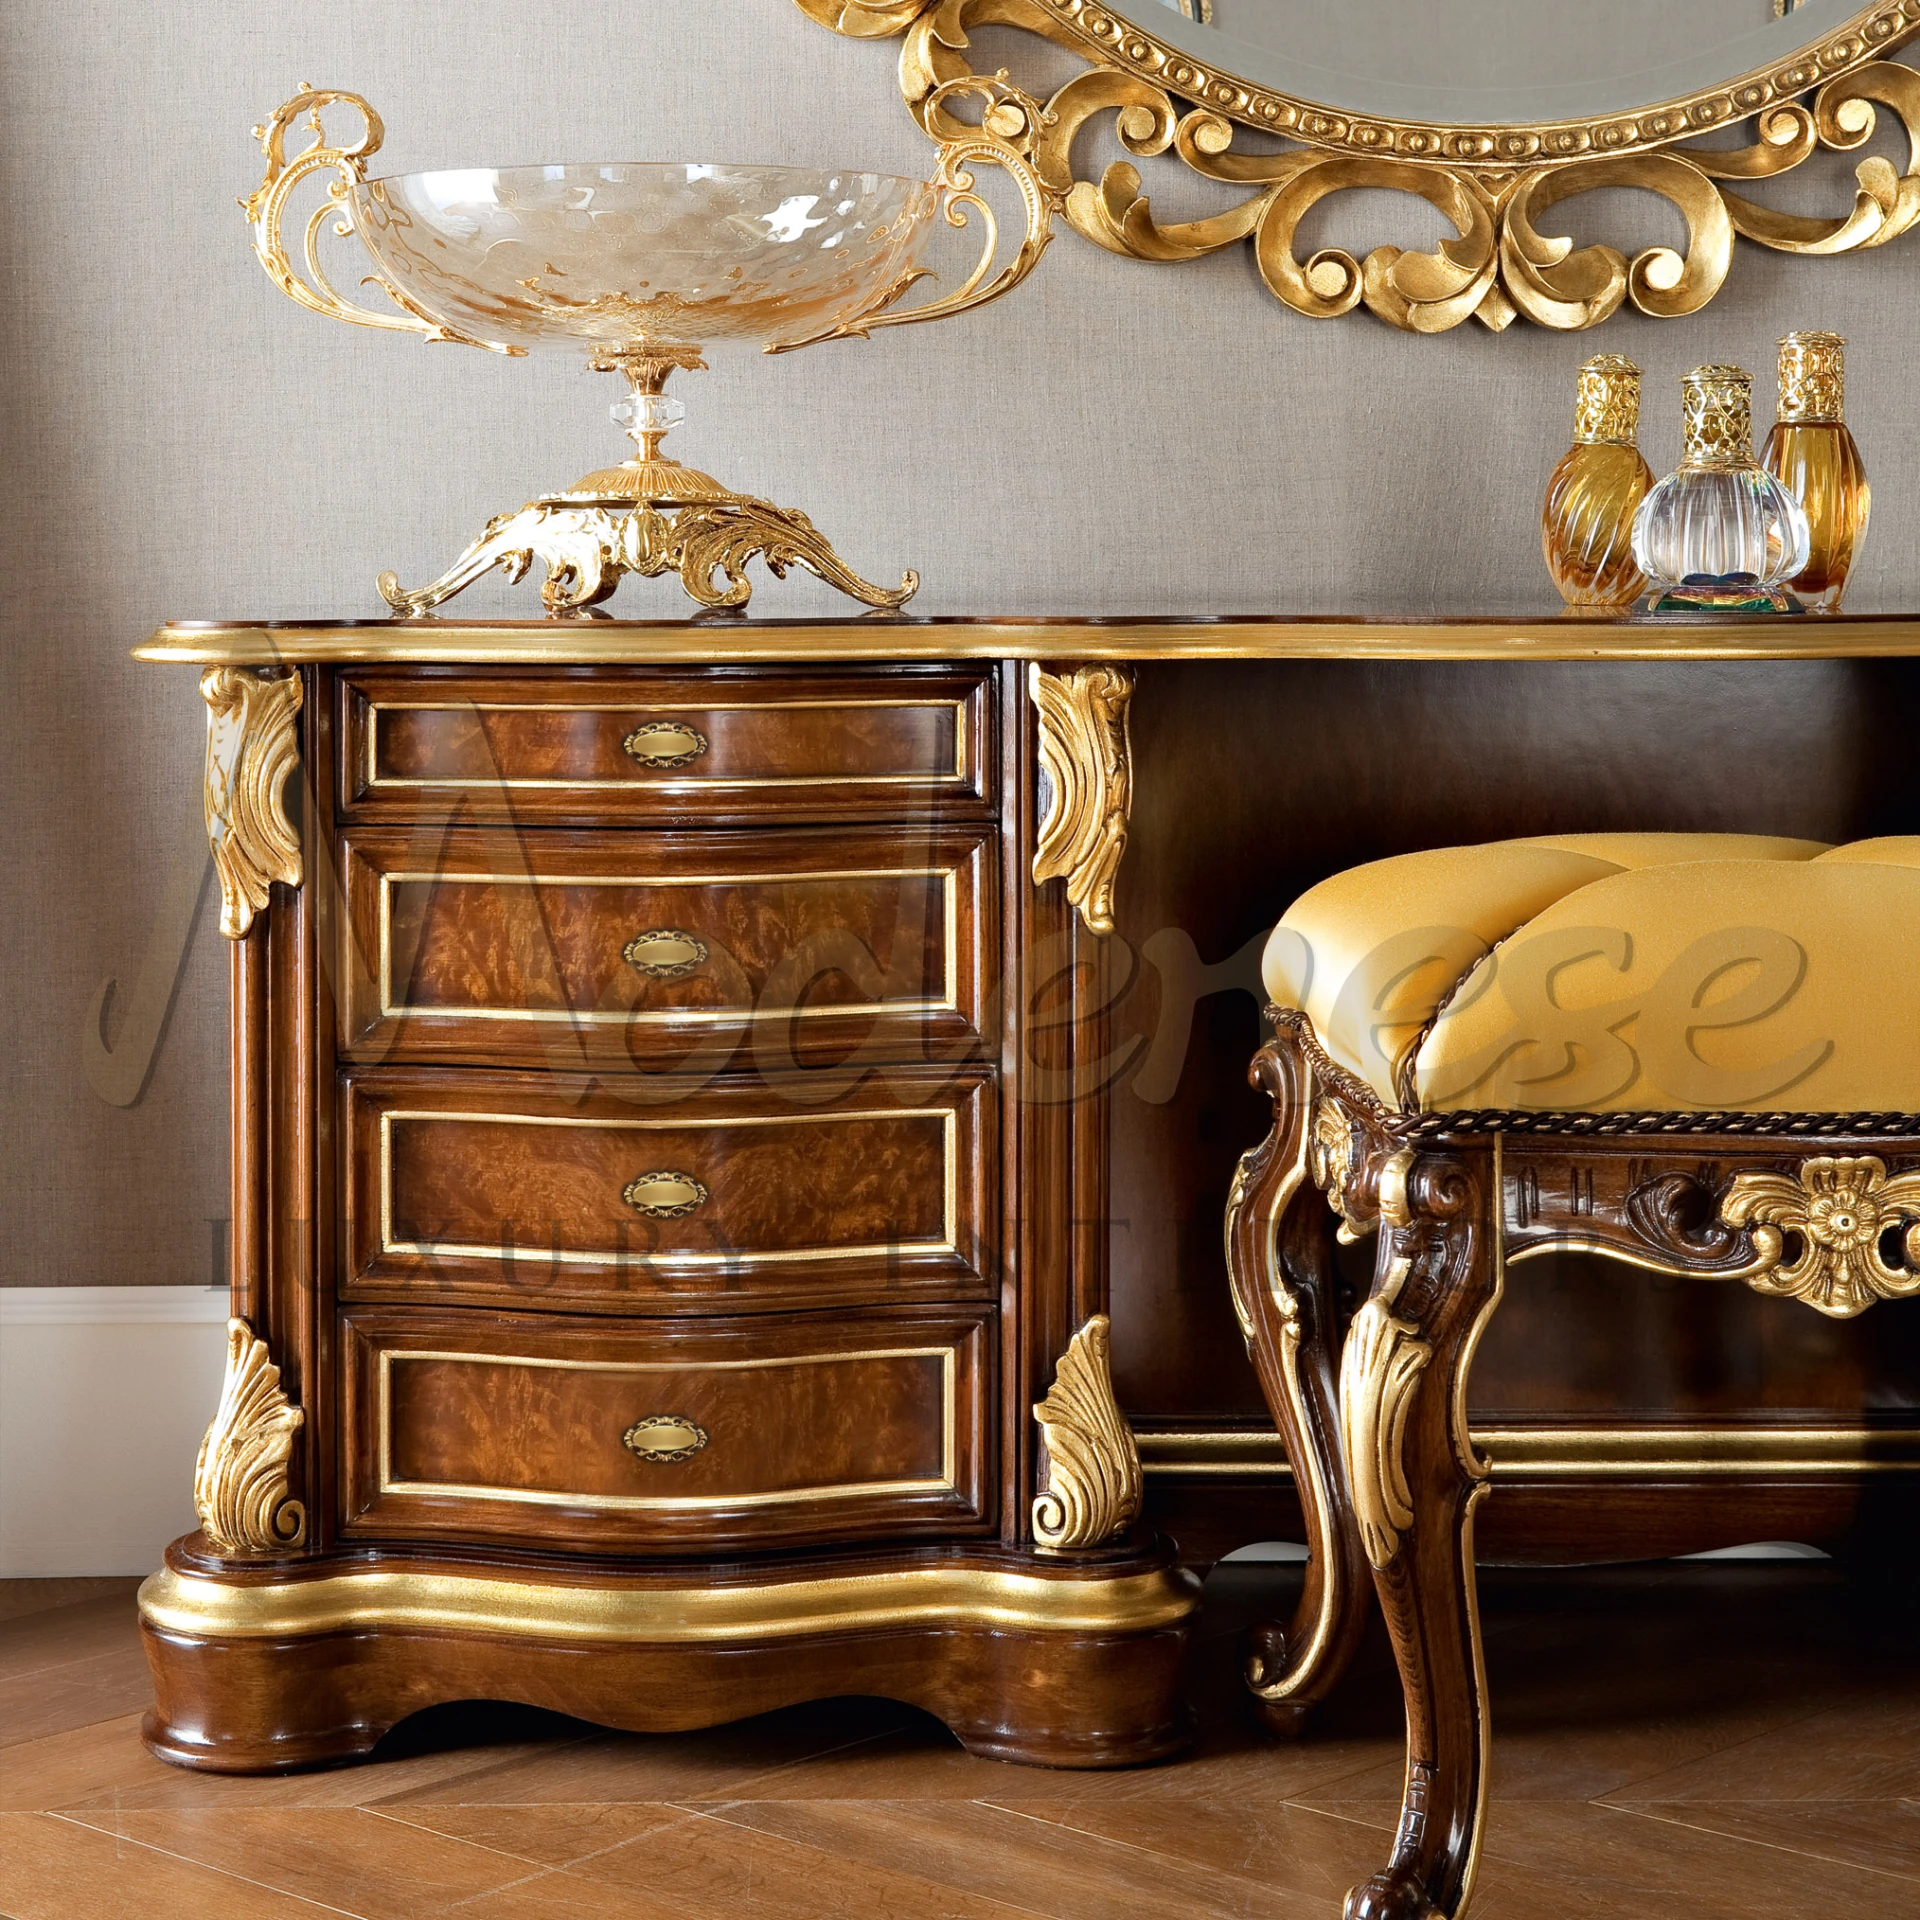 A close-up of an intricately designed chest of drawers with decorative elements.